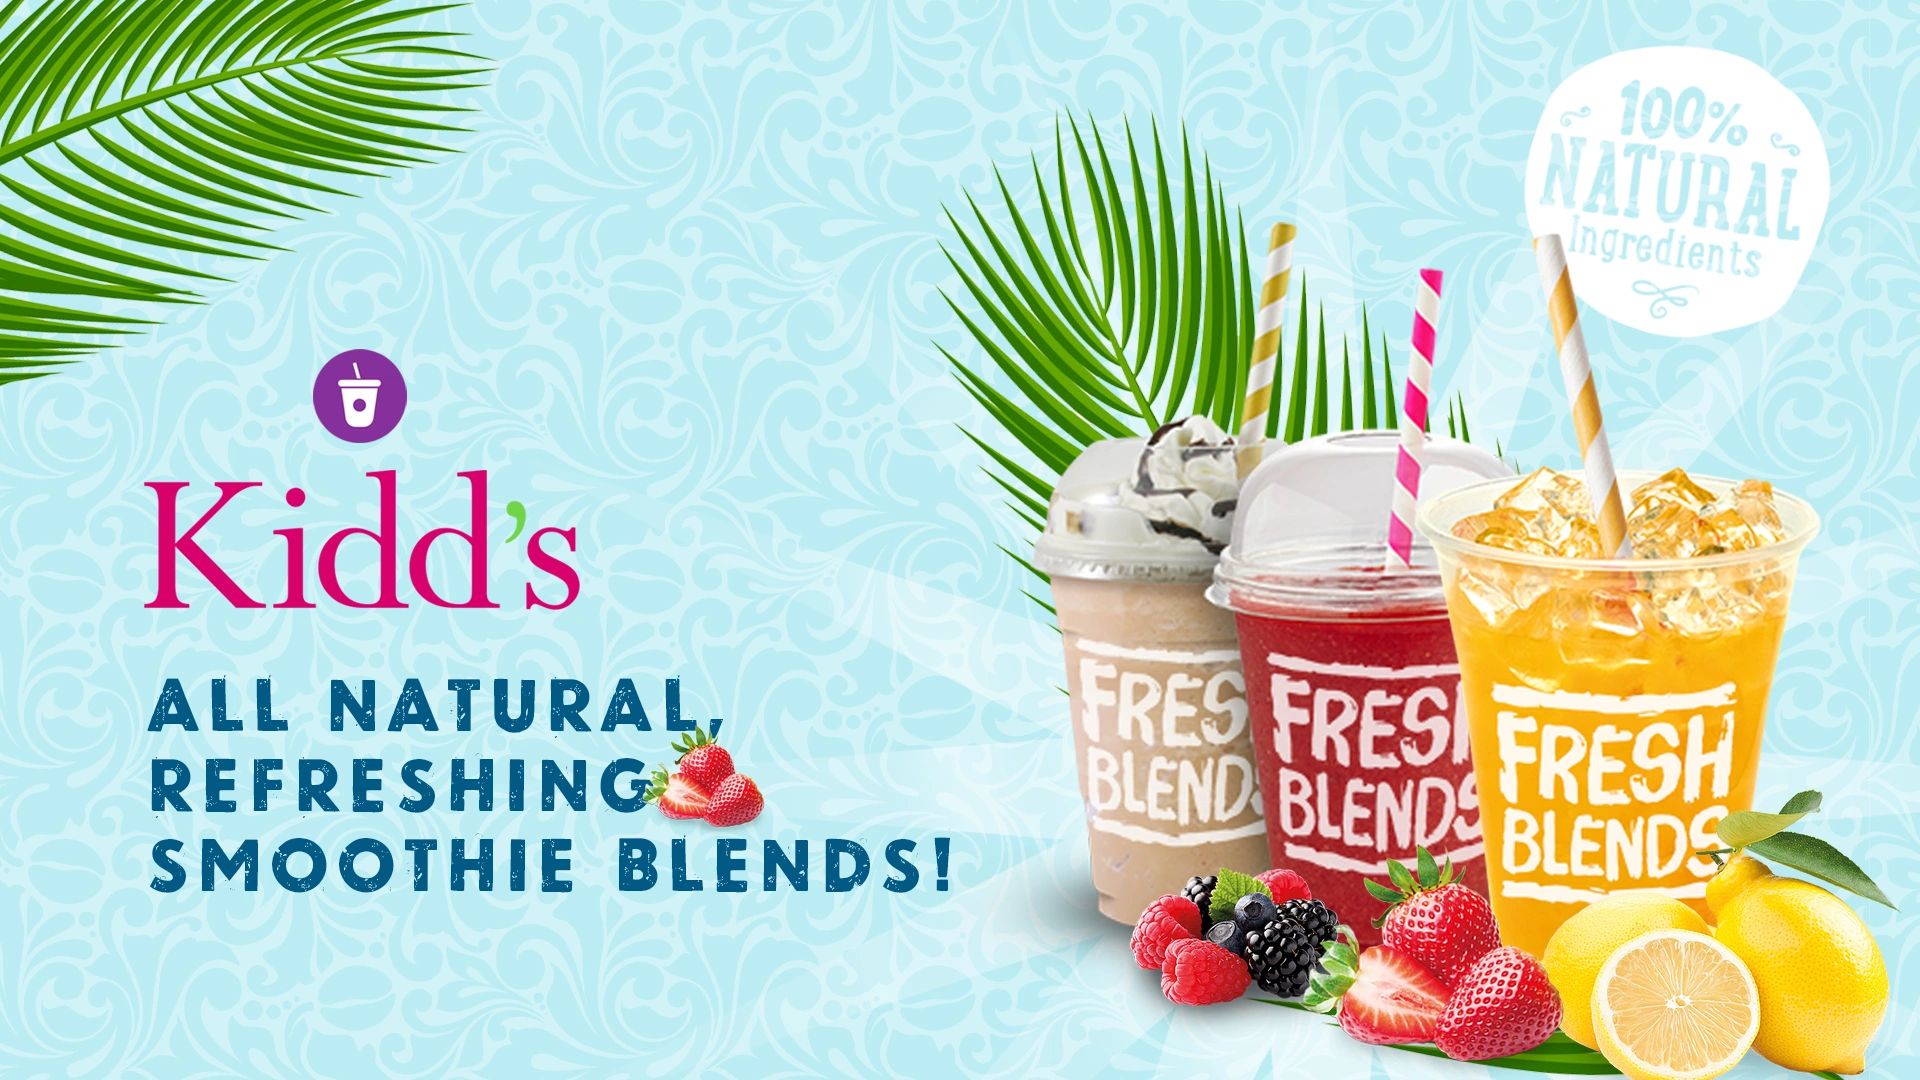 all natural fruit smoothies. no high fructose corn syrup, no artificial dyes or flavors.